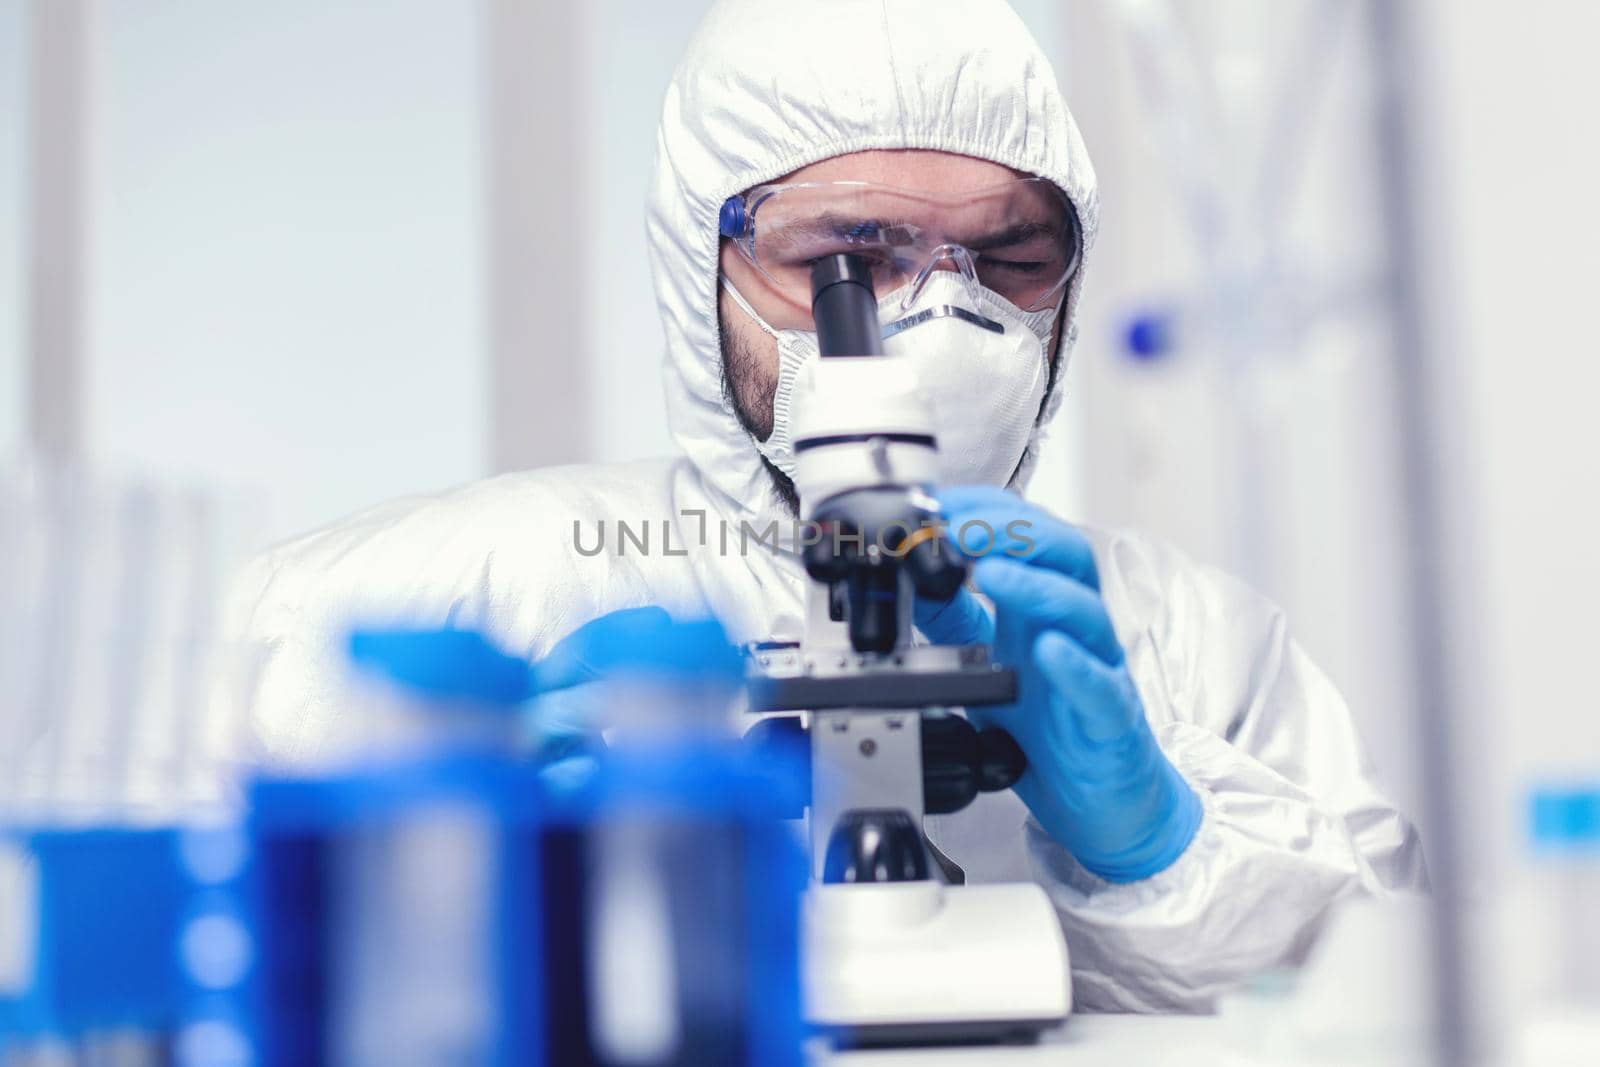 Microbiologist researcher wearing ppe and protection glasses in medicine lab looking through microscope. Scientist in protective suit sitting at workplace using modern medical technology during global epidemic.